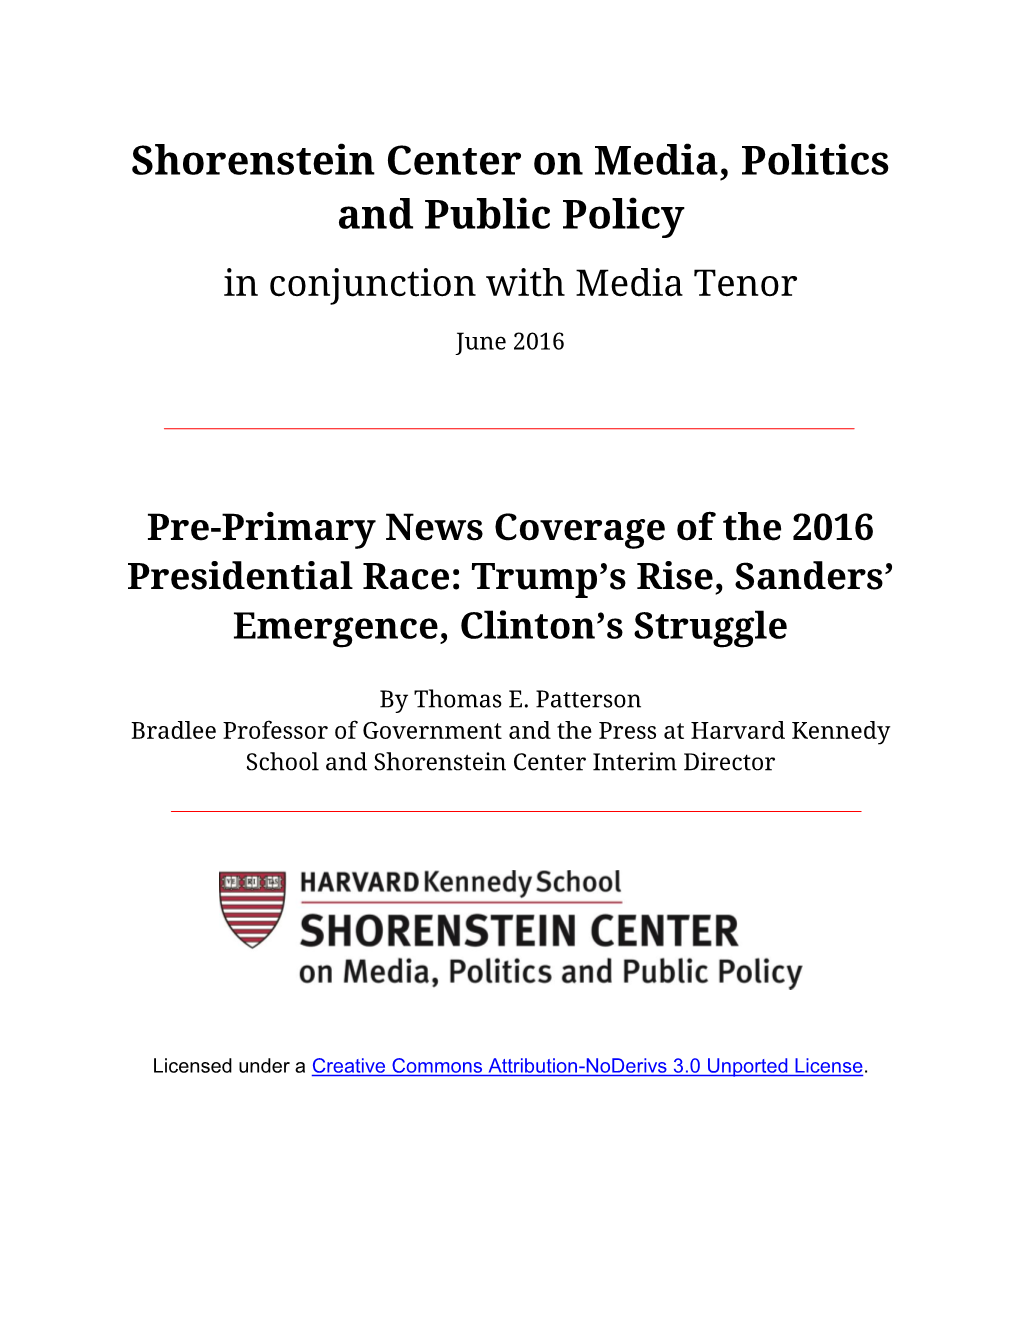 Pre-Primary News Coverage of the 2016 Presidential Race: Trump’S Rise, Sanders’ Emergence, Clinton’S Struggle